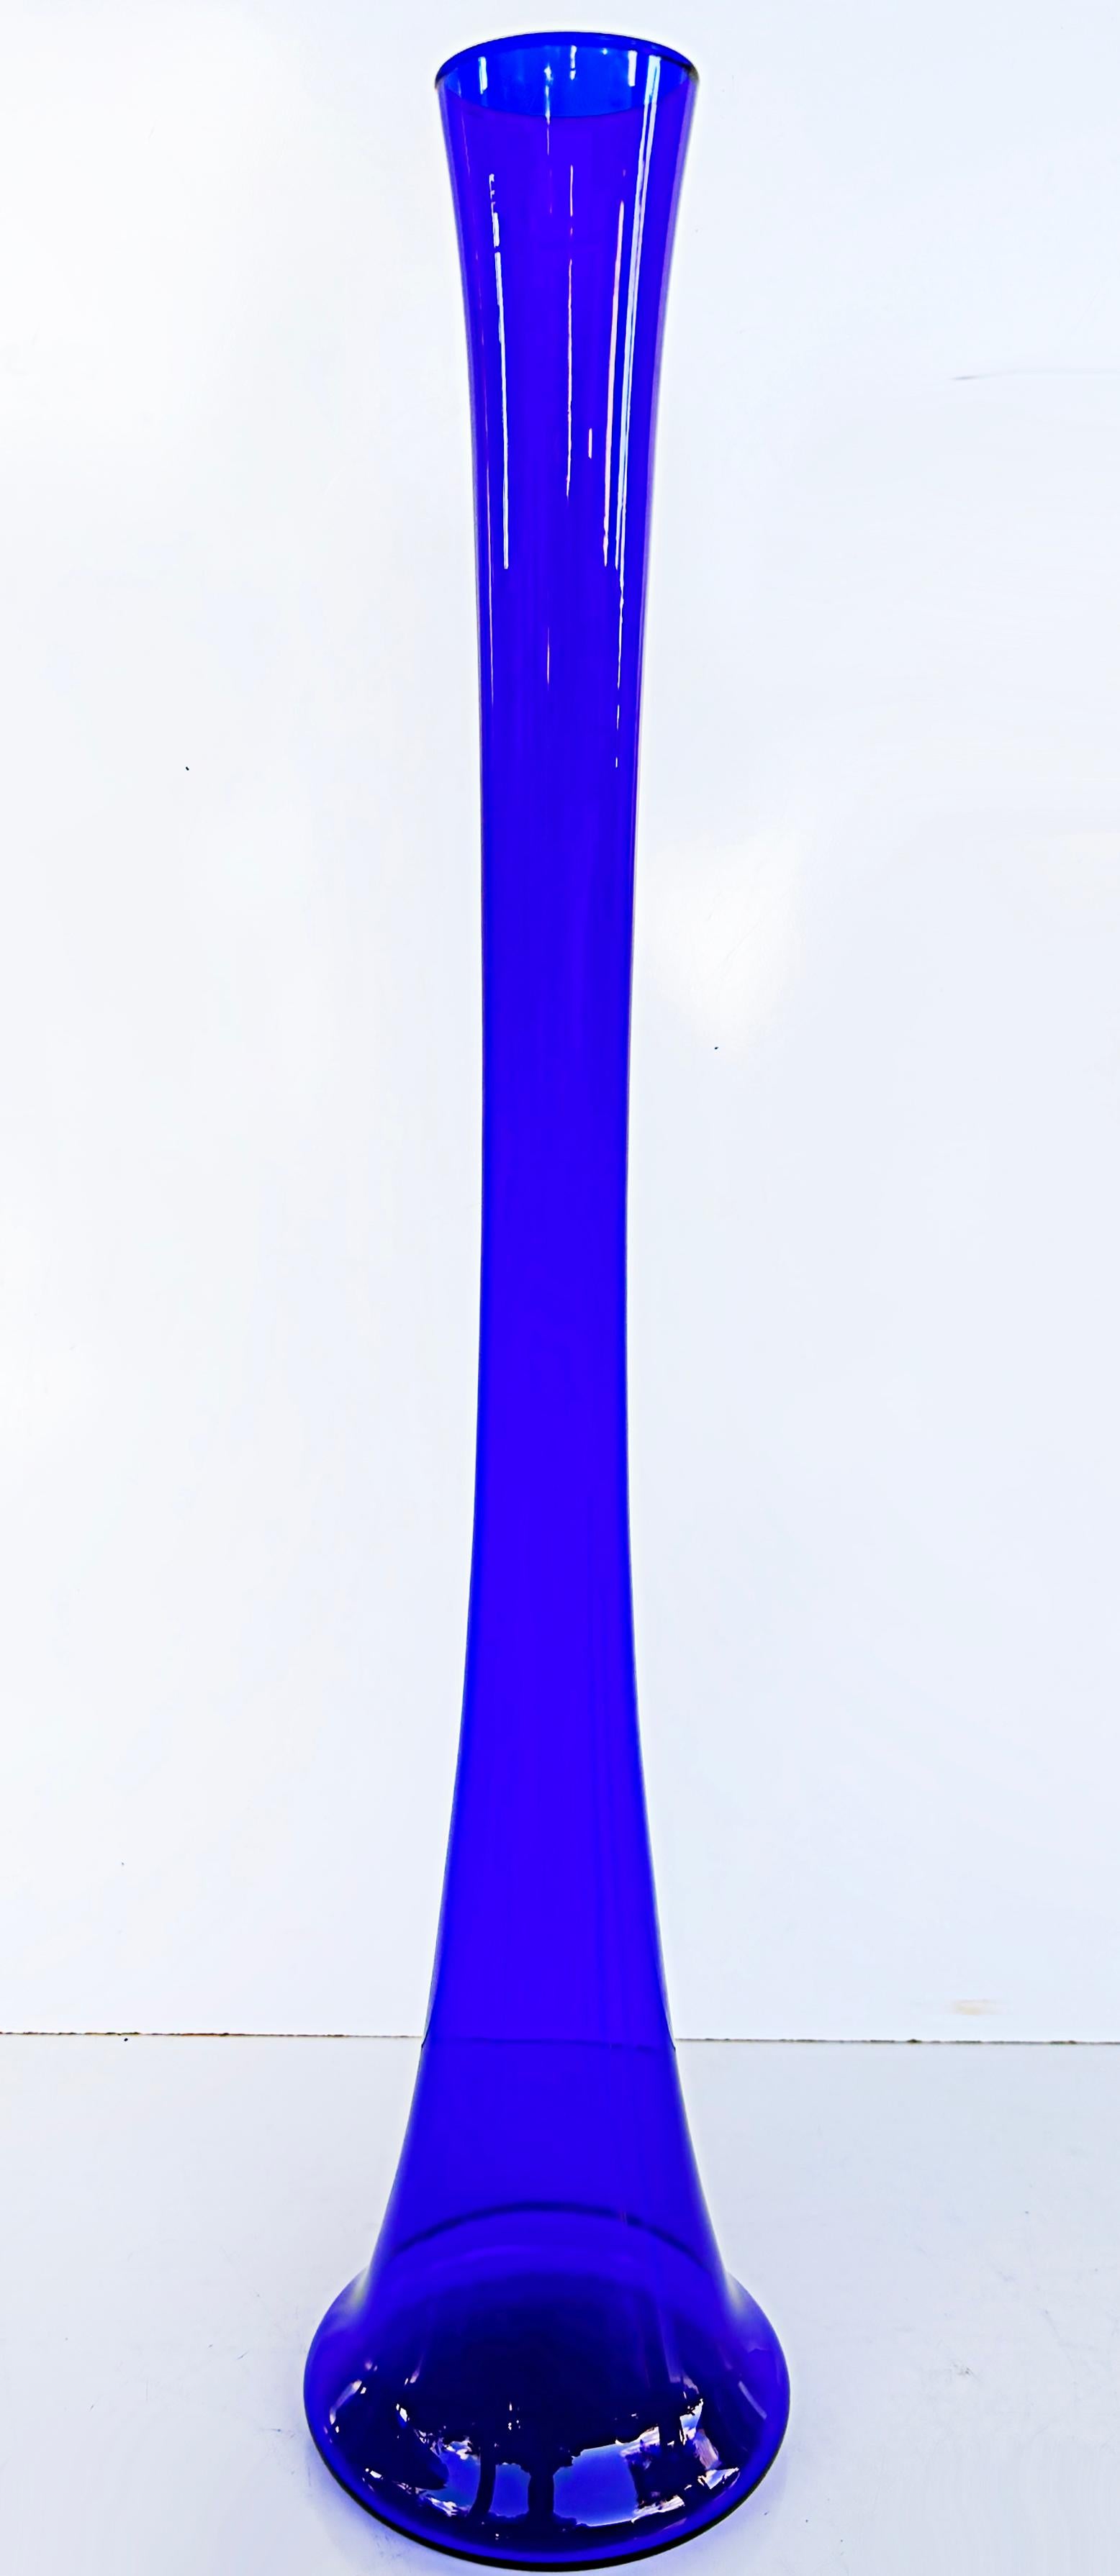 Midcentury German extra tall cobalt blue glass soliflore vase

Offered for sale is a tall midcentury cobalt blue vase that was handblown in the 1960s by Salco Kristallglas of Mundgeblasen Germany. We are calling it cobalt, but you can call it